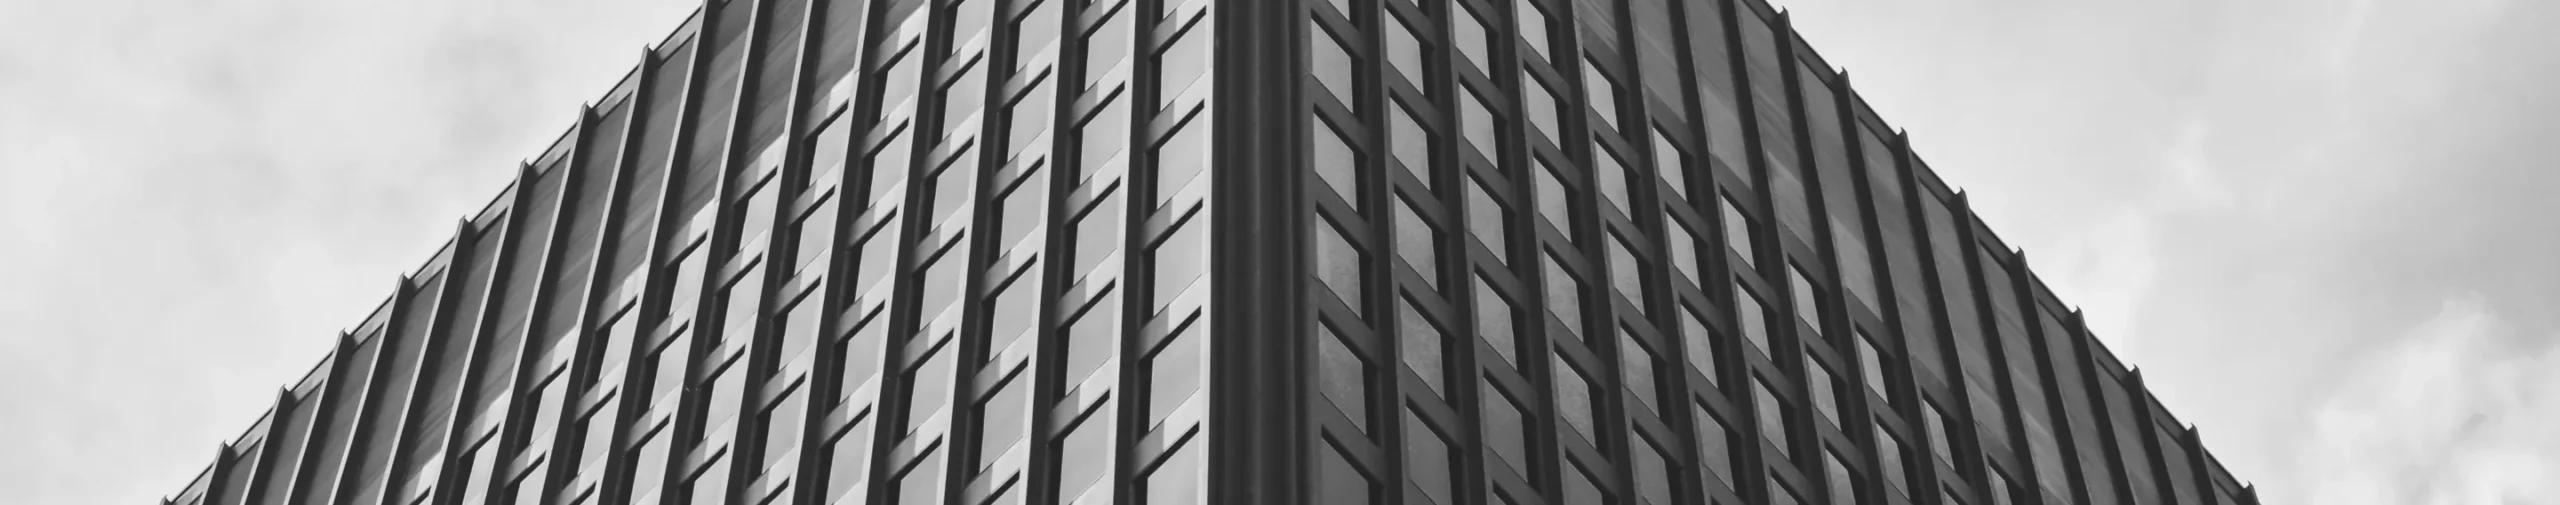 A building BW image